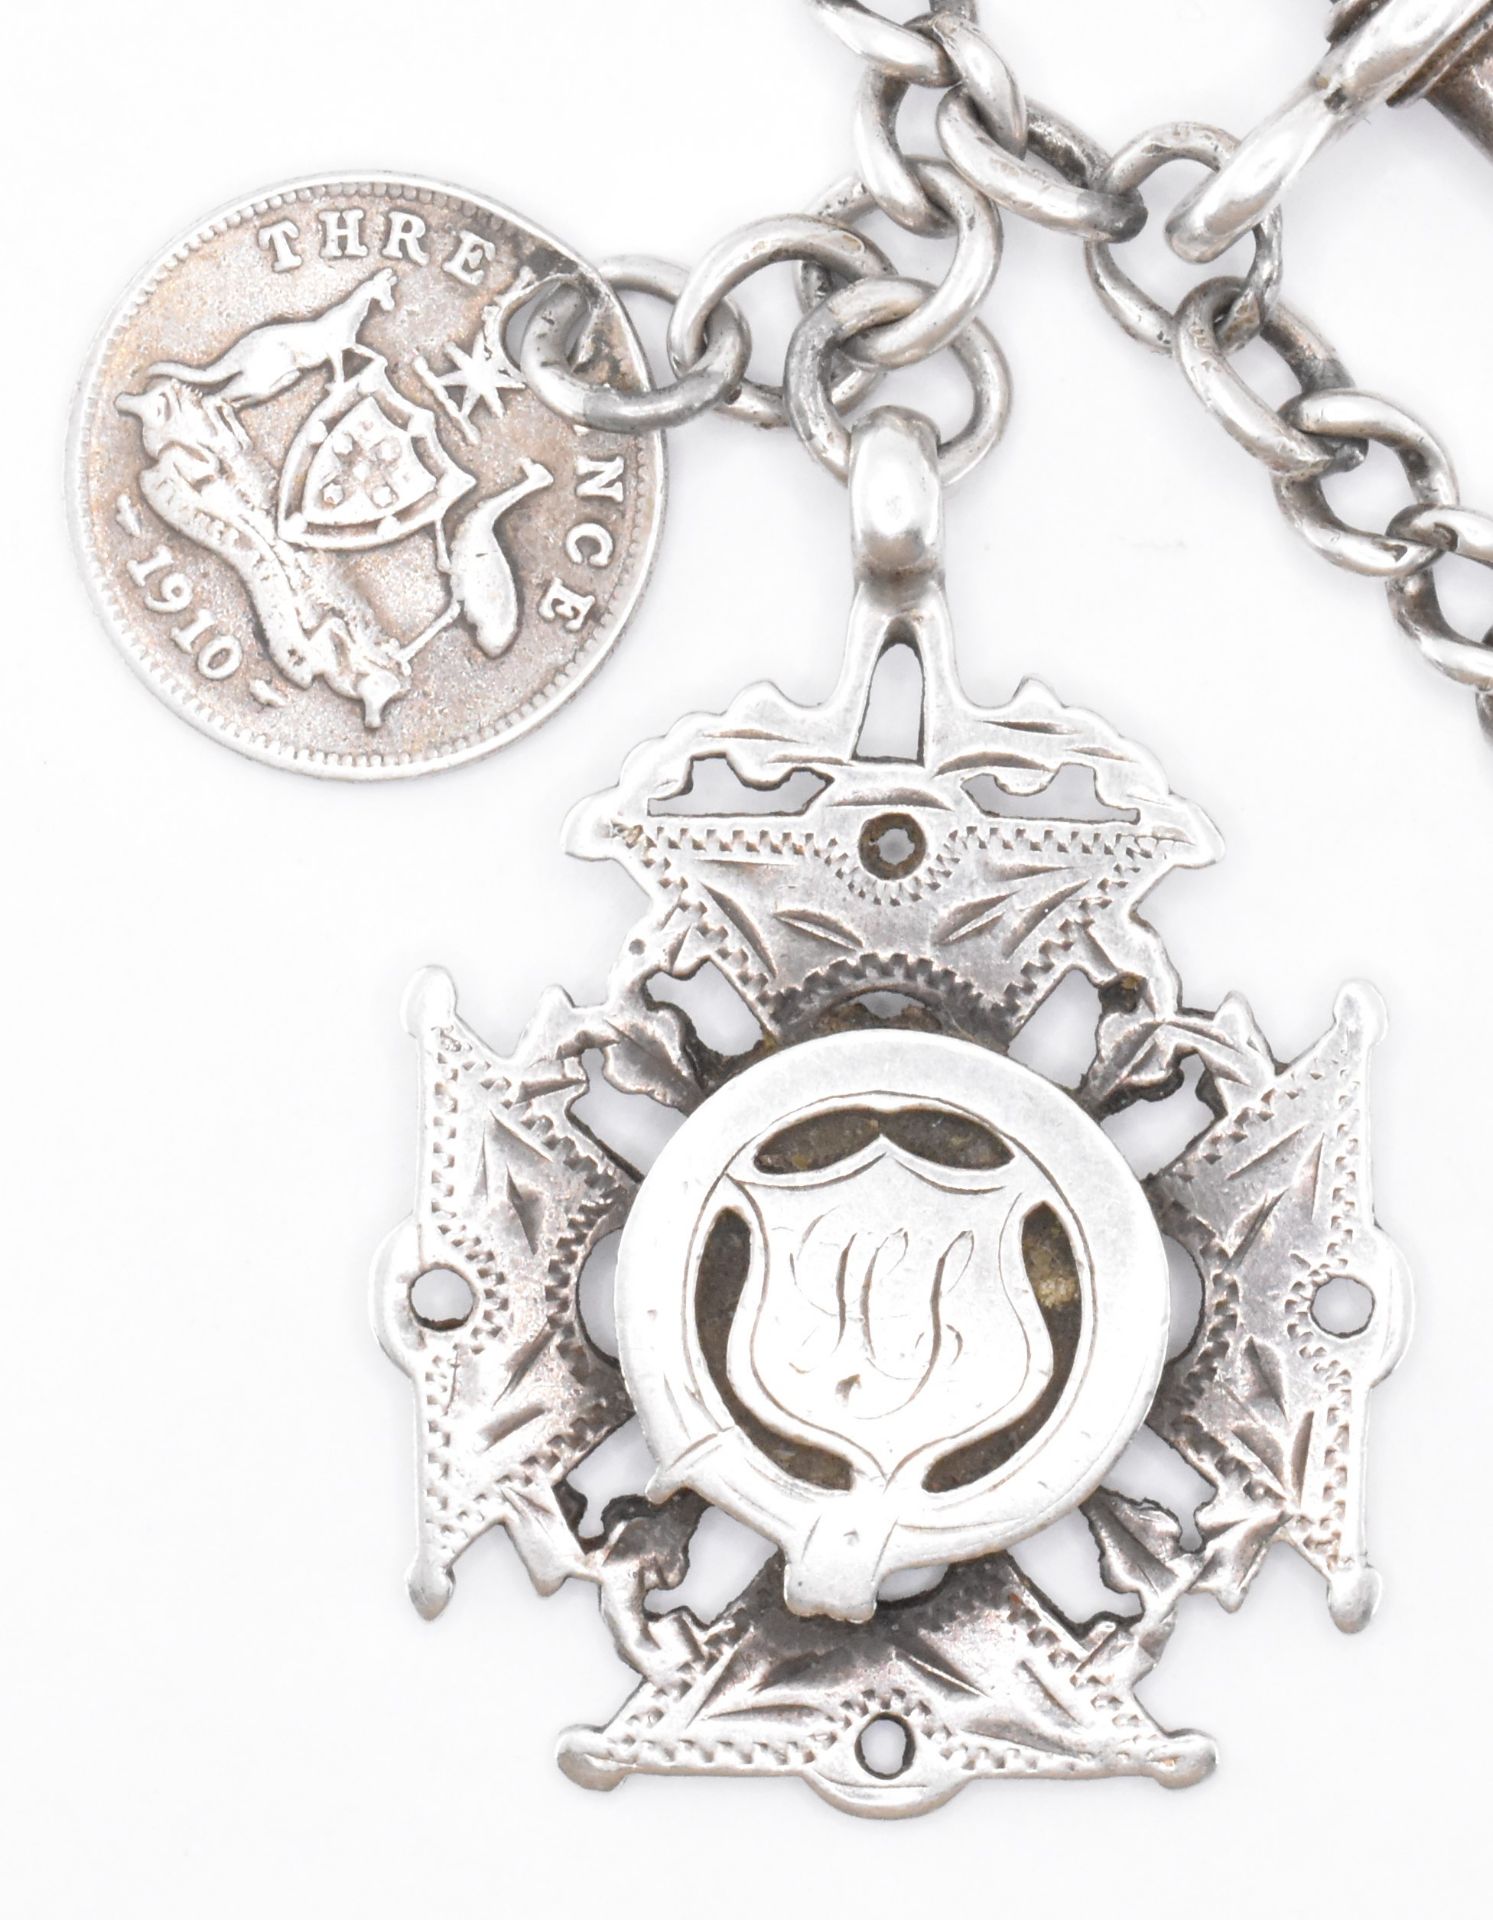 EDWARDIAN SILVER POCKET WATCH CHAIN WITH VESTA & MEDAL - Image 2 of 12